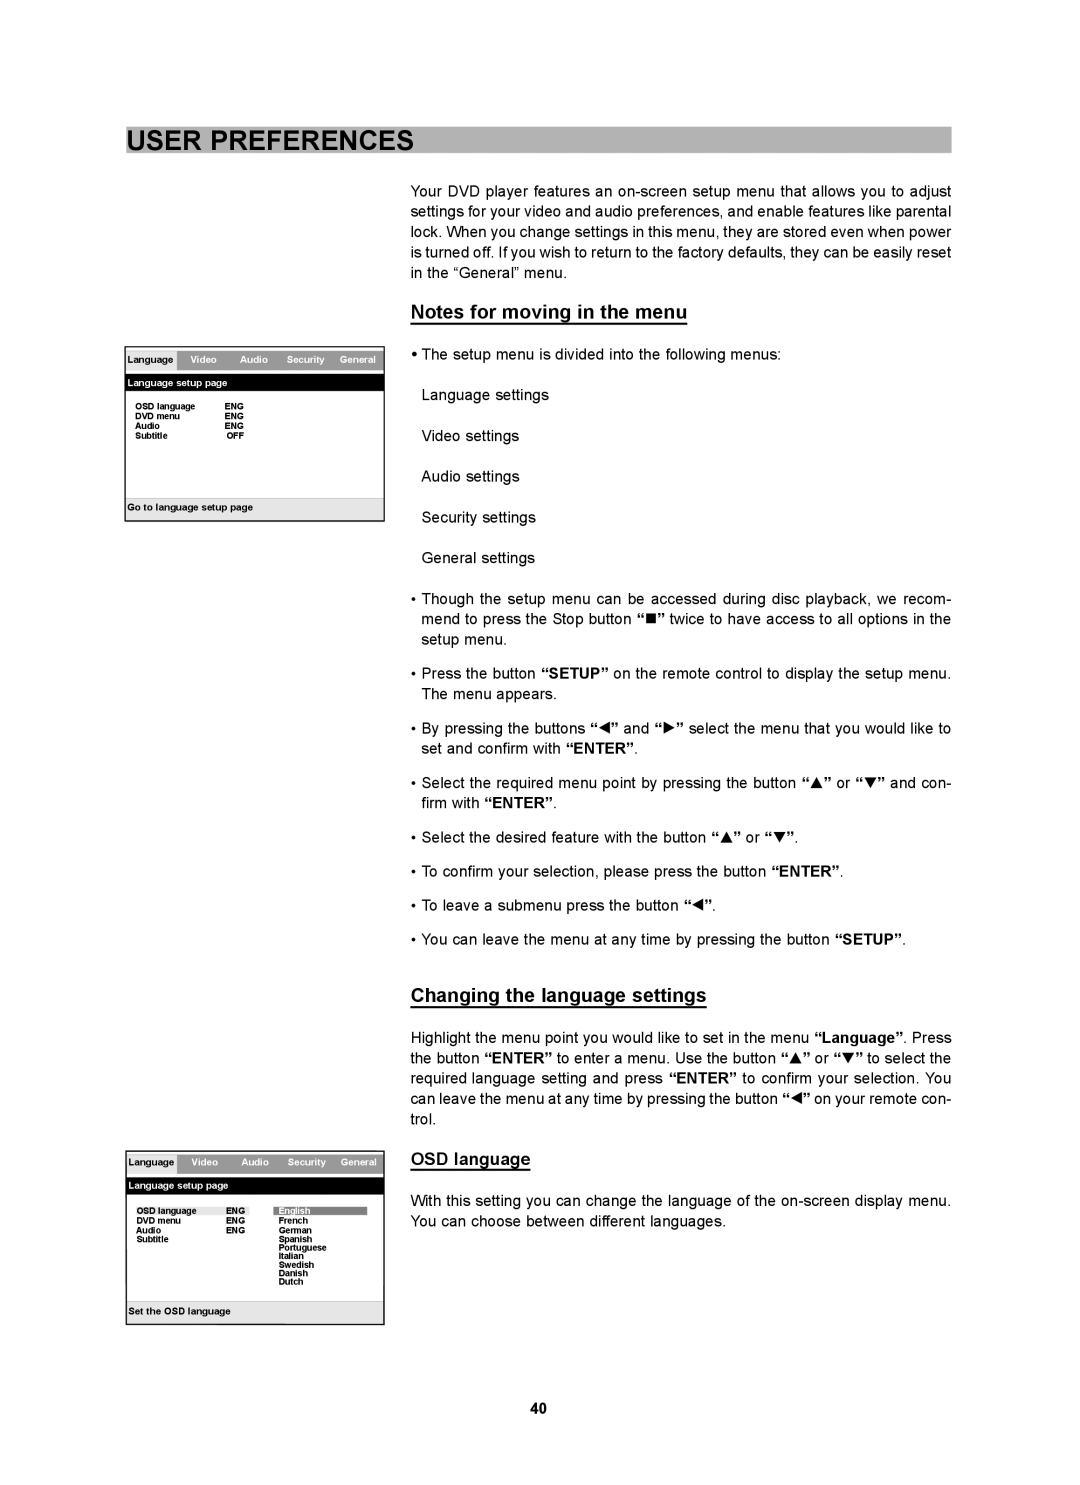 CyberHome Entertainment CH-DVD 452 manual User Preferences, Notes for moving in the menu, Changing the language settings 